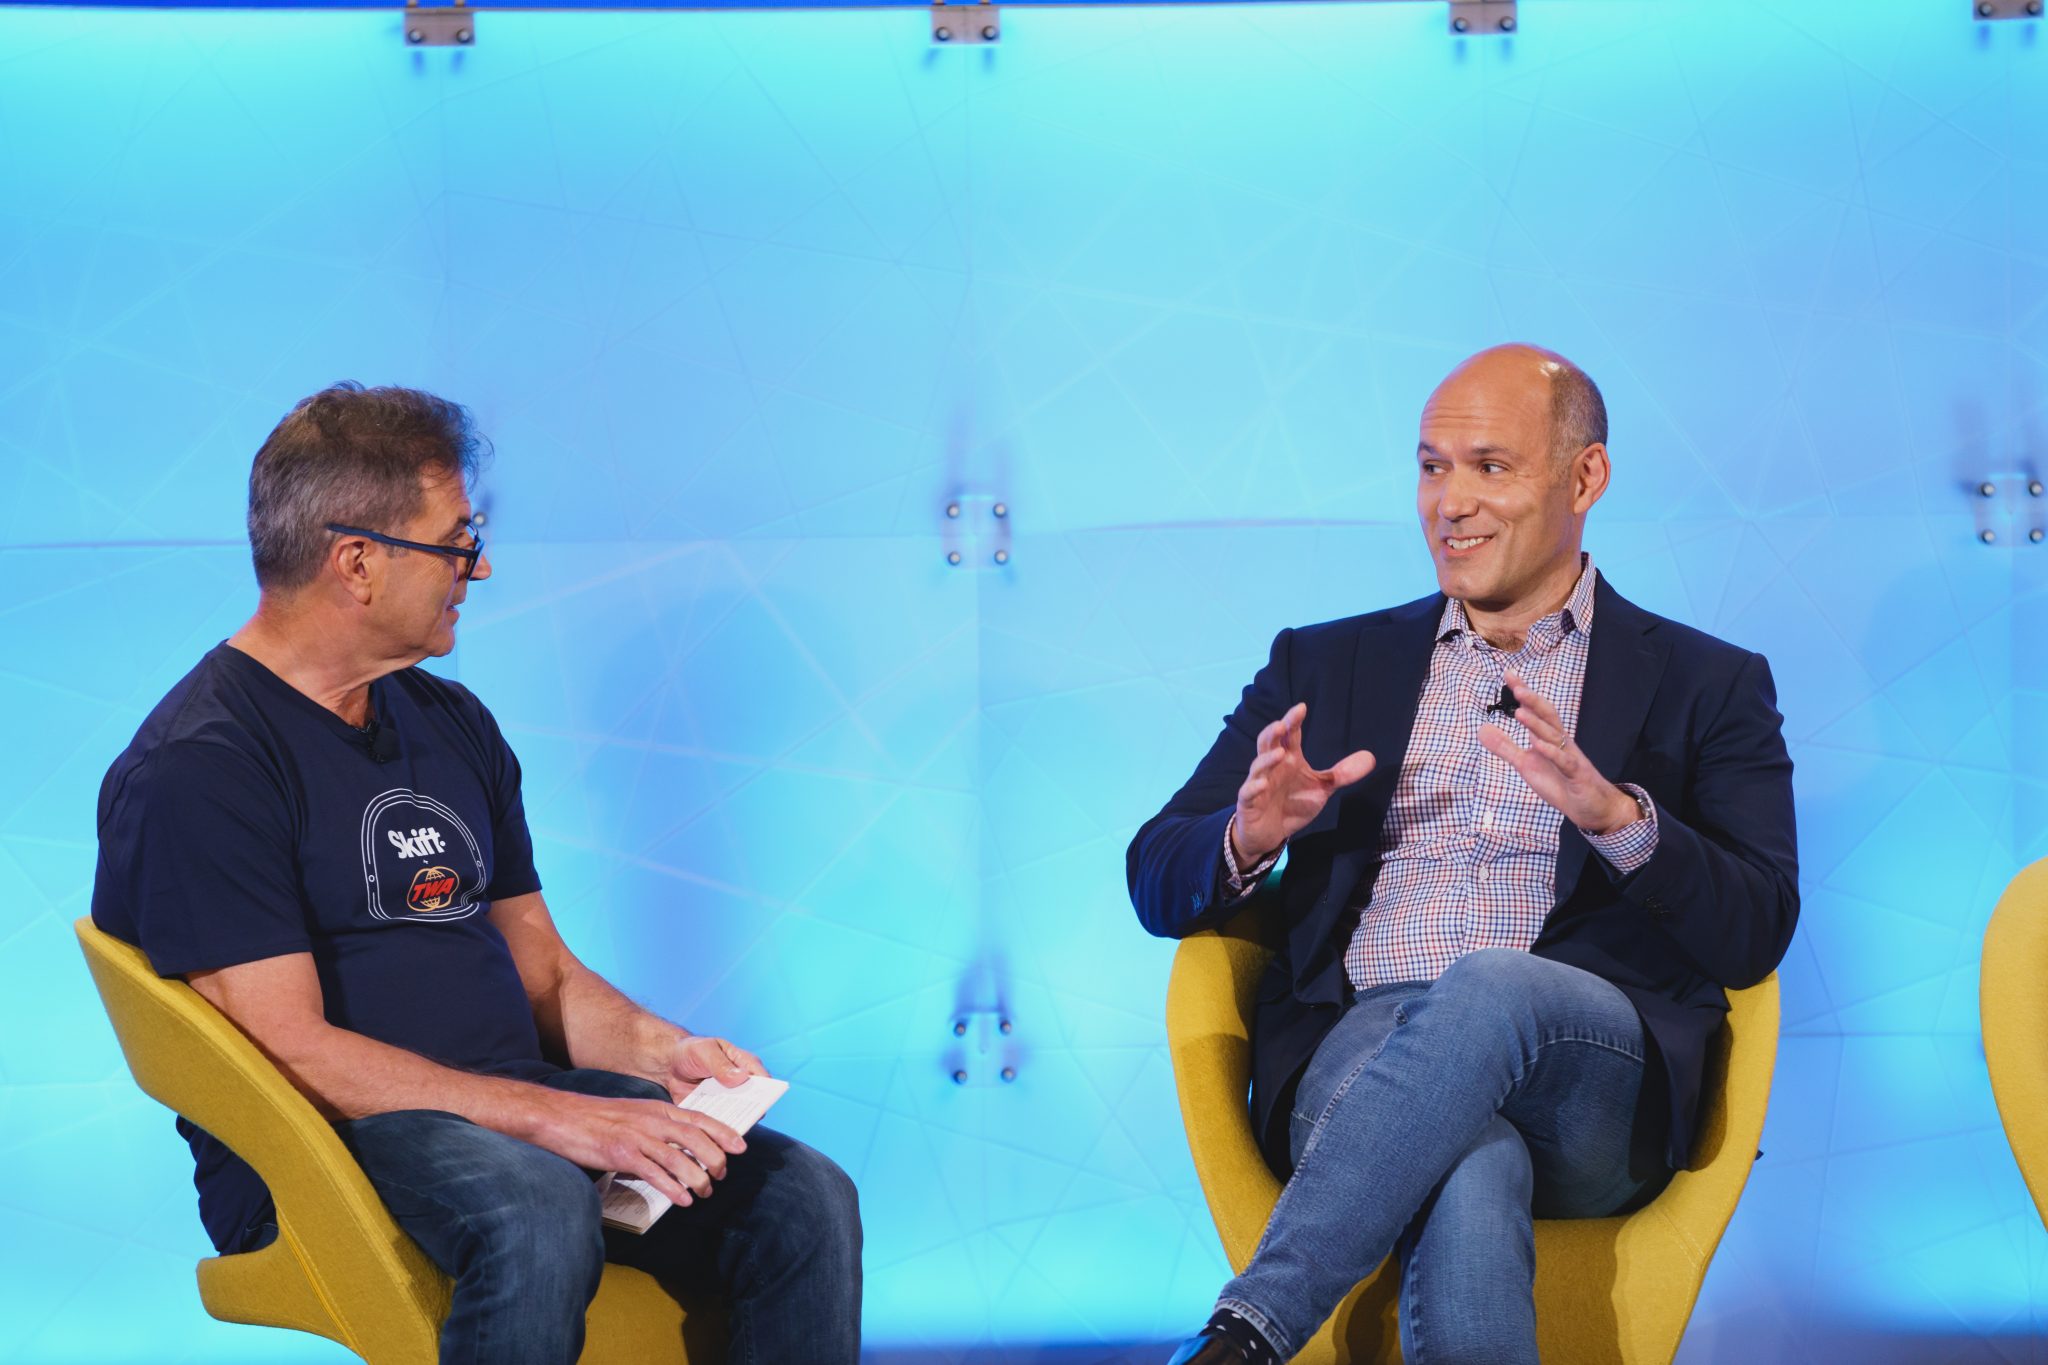 Expedia Group CEO Peter Kern in discussion with Skift Executive Editor Dennis Schaal at Skift Global Forum on Sept. 22, 2021. Source: Skift